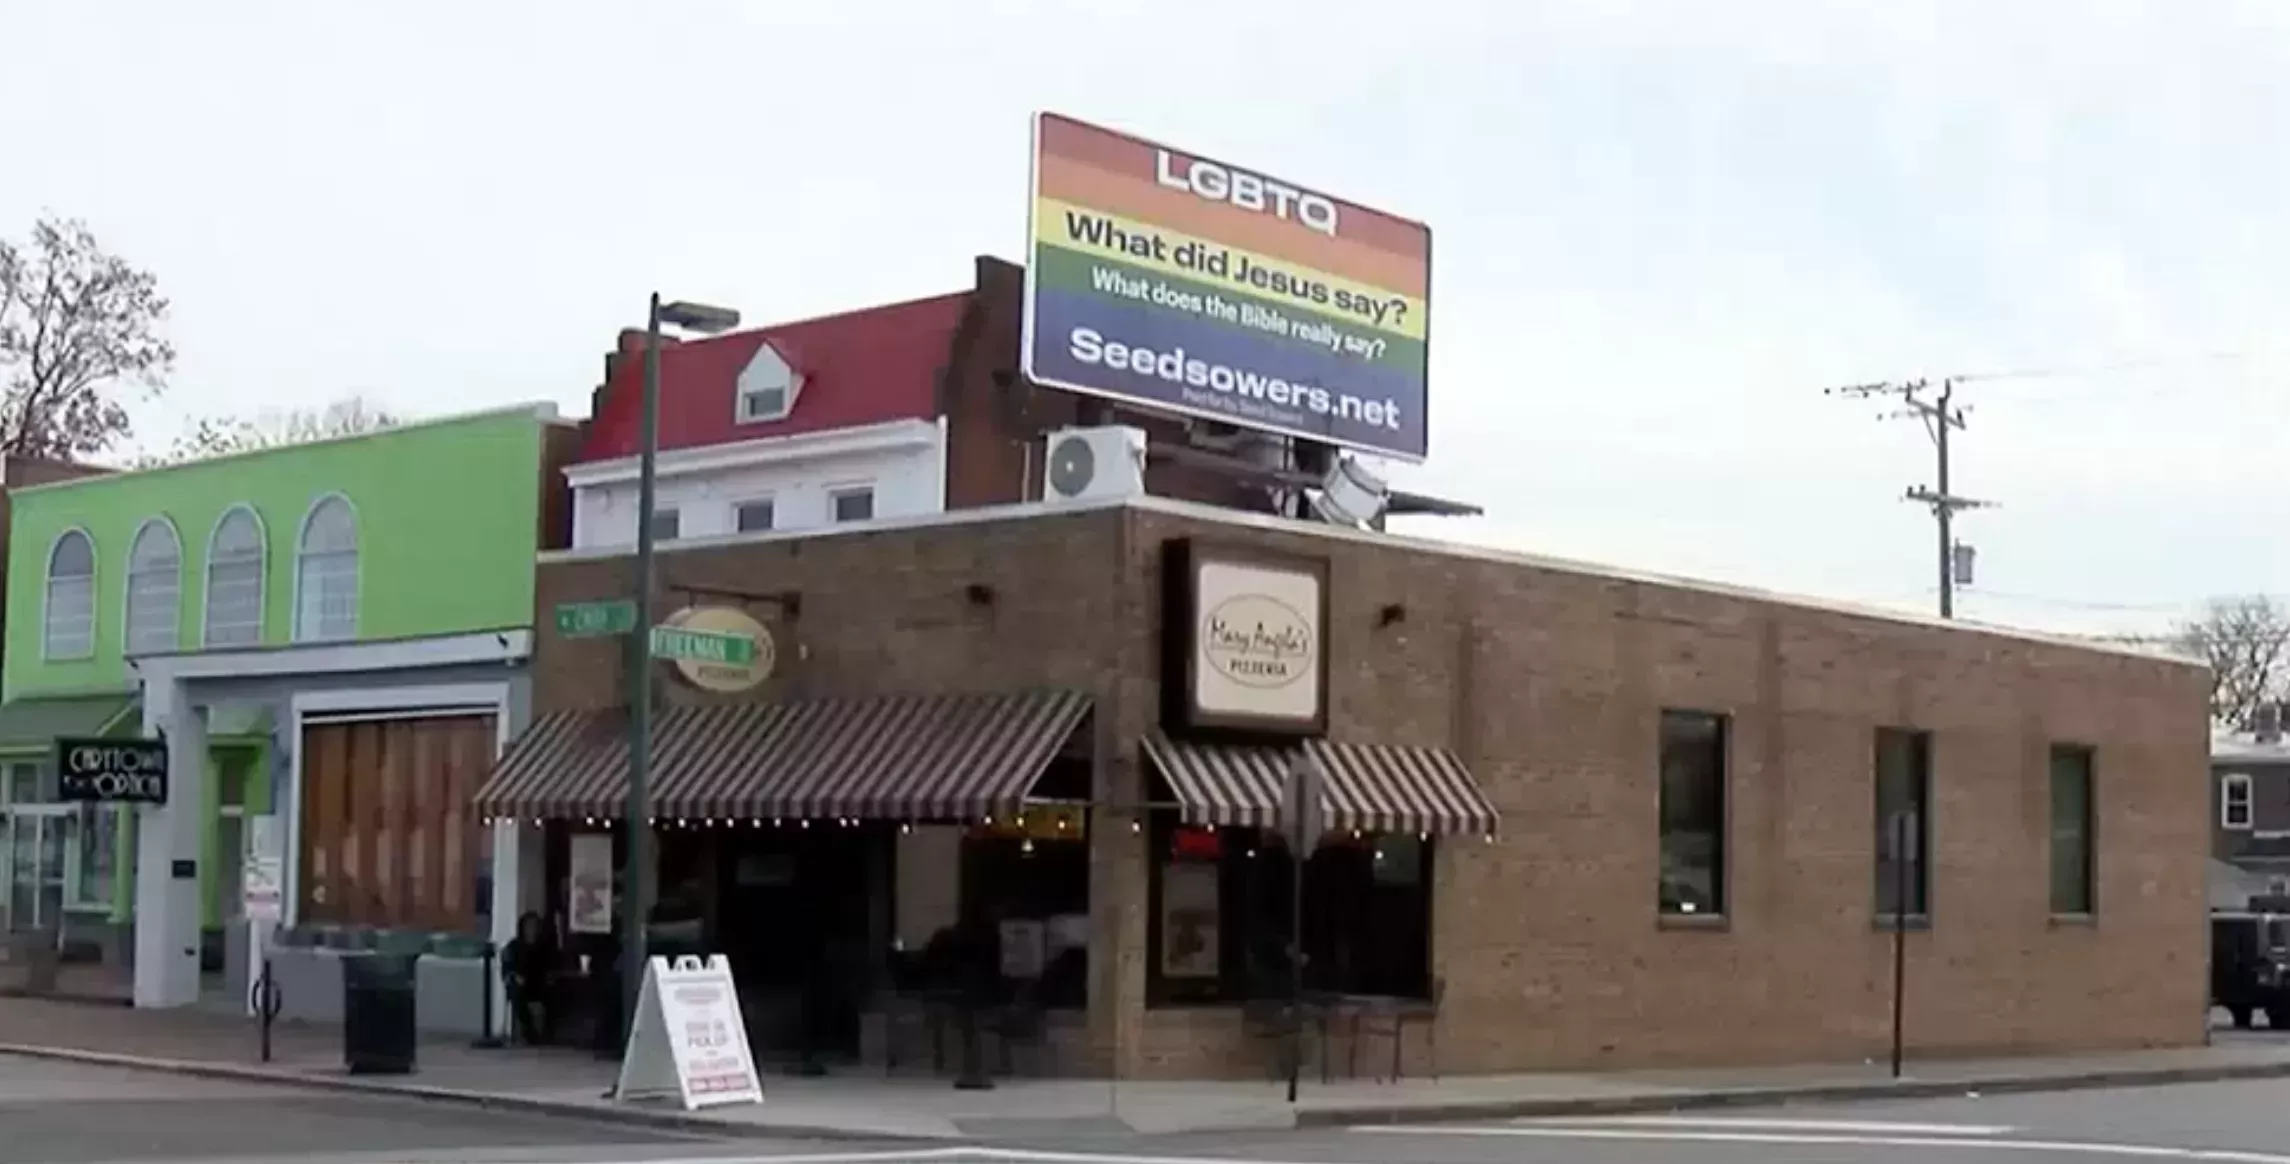 A rainbow colored billboard with heavily Christian text sits atop Mary Angela's Pizzeria in Carytown, Virginia.